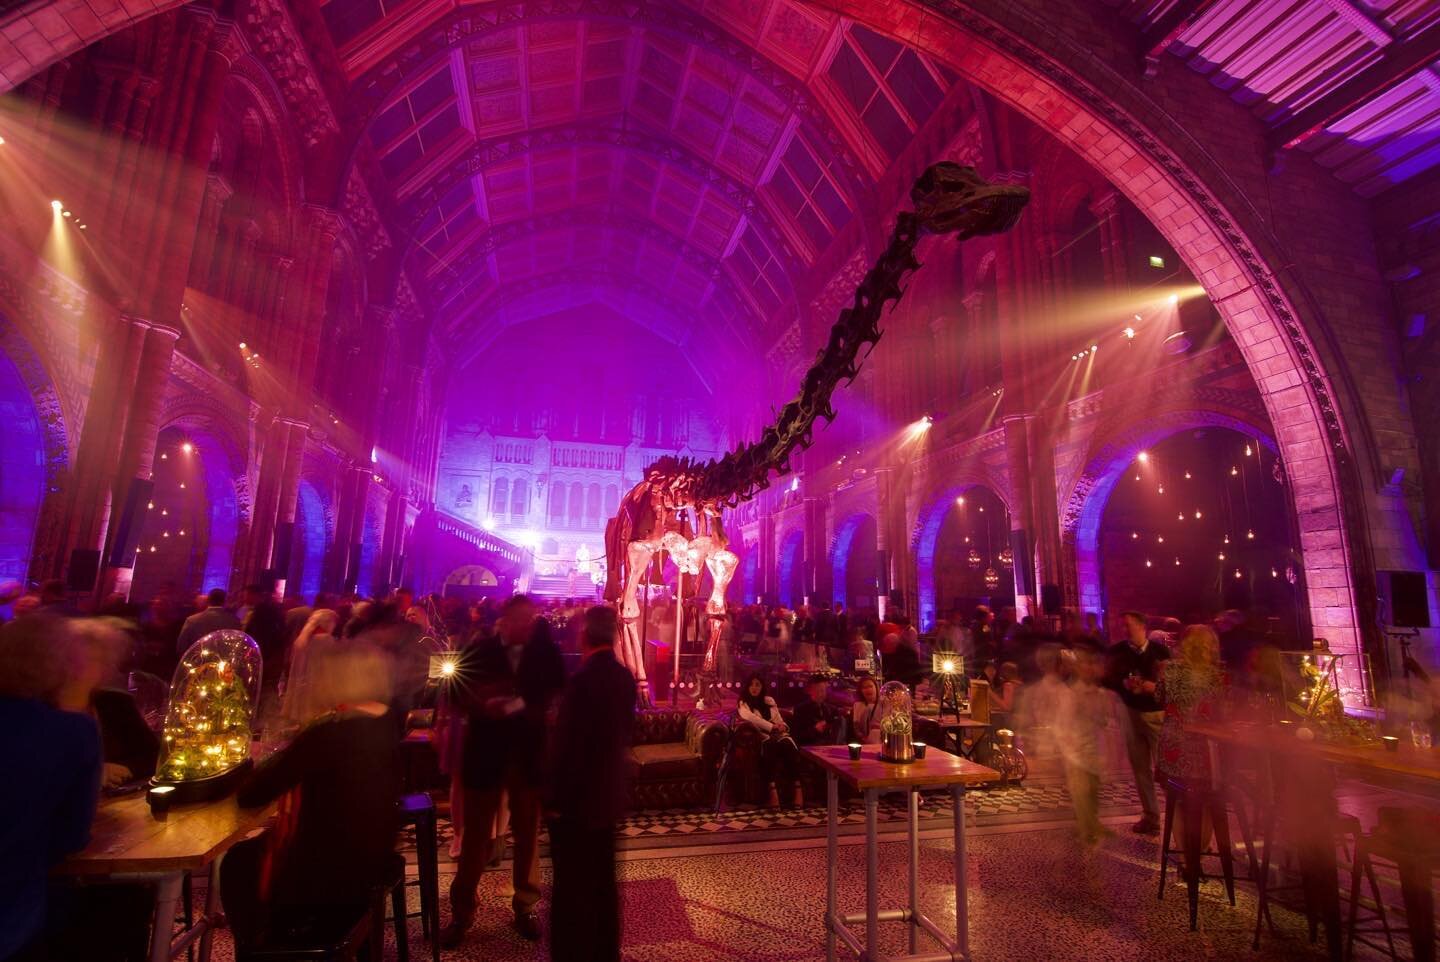 Flashback to when dinosaurs ruled the museum. #eventvideography #photography #dinosaurs #dippy